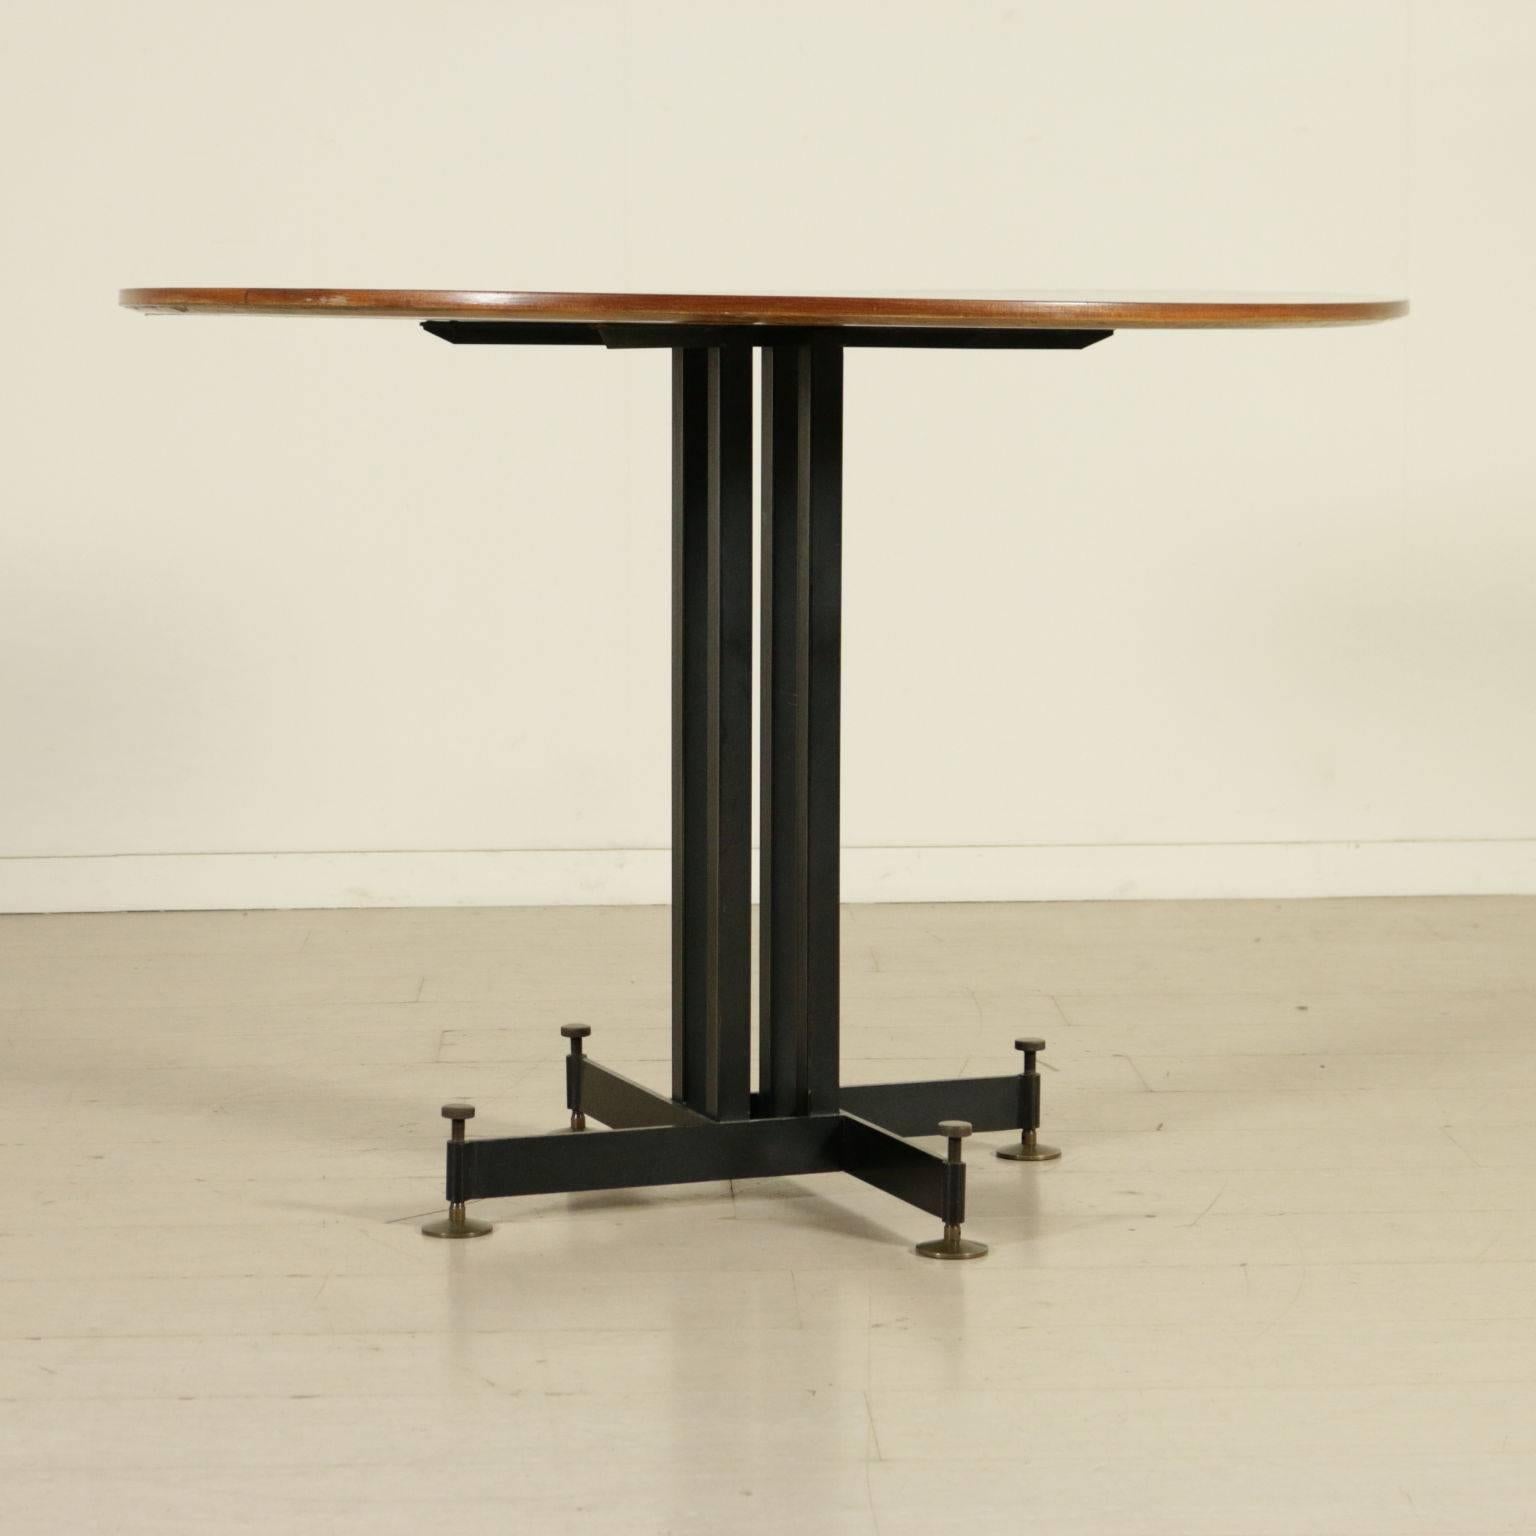 A table, mahogany veneer, metal legs with adjustable brass foot. Manufactured in Italy, 1960s.